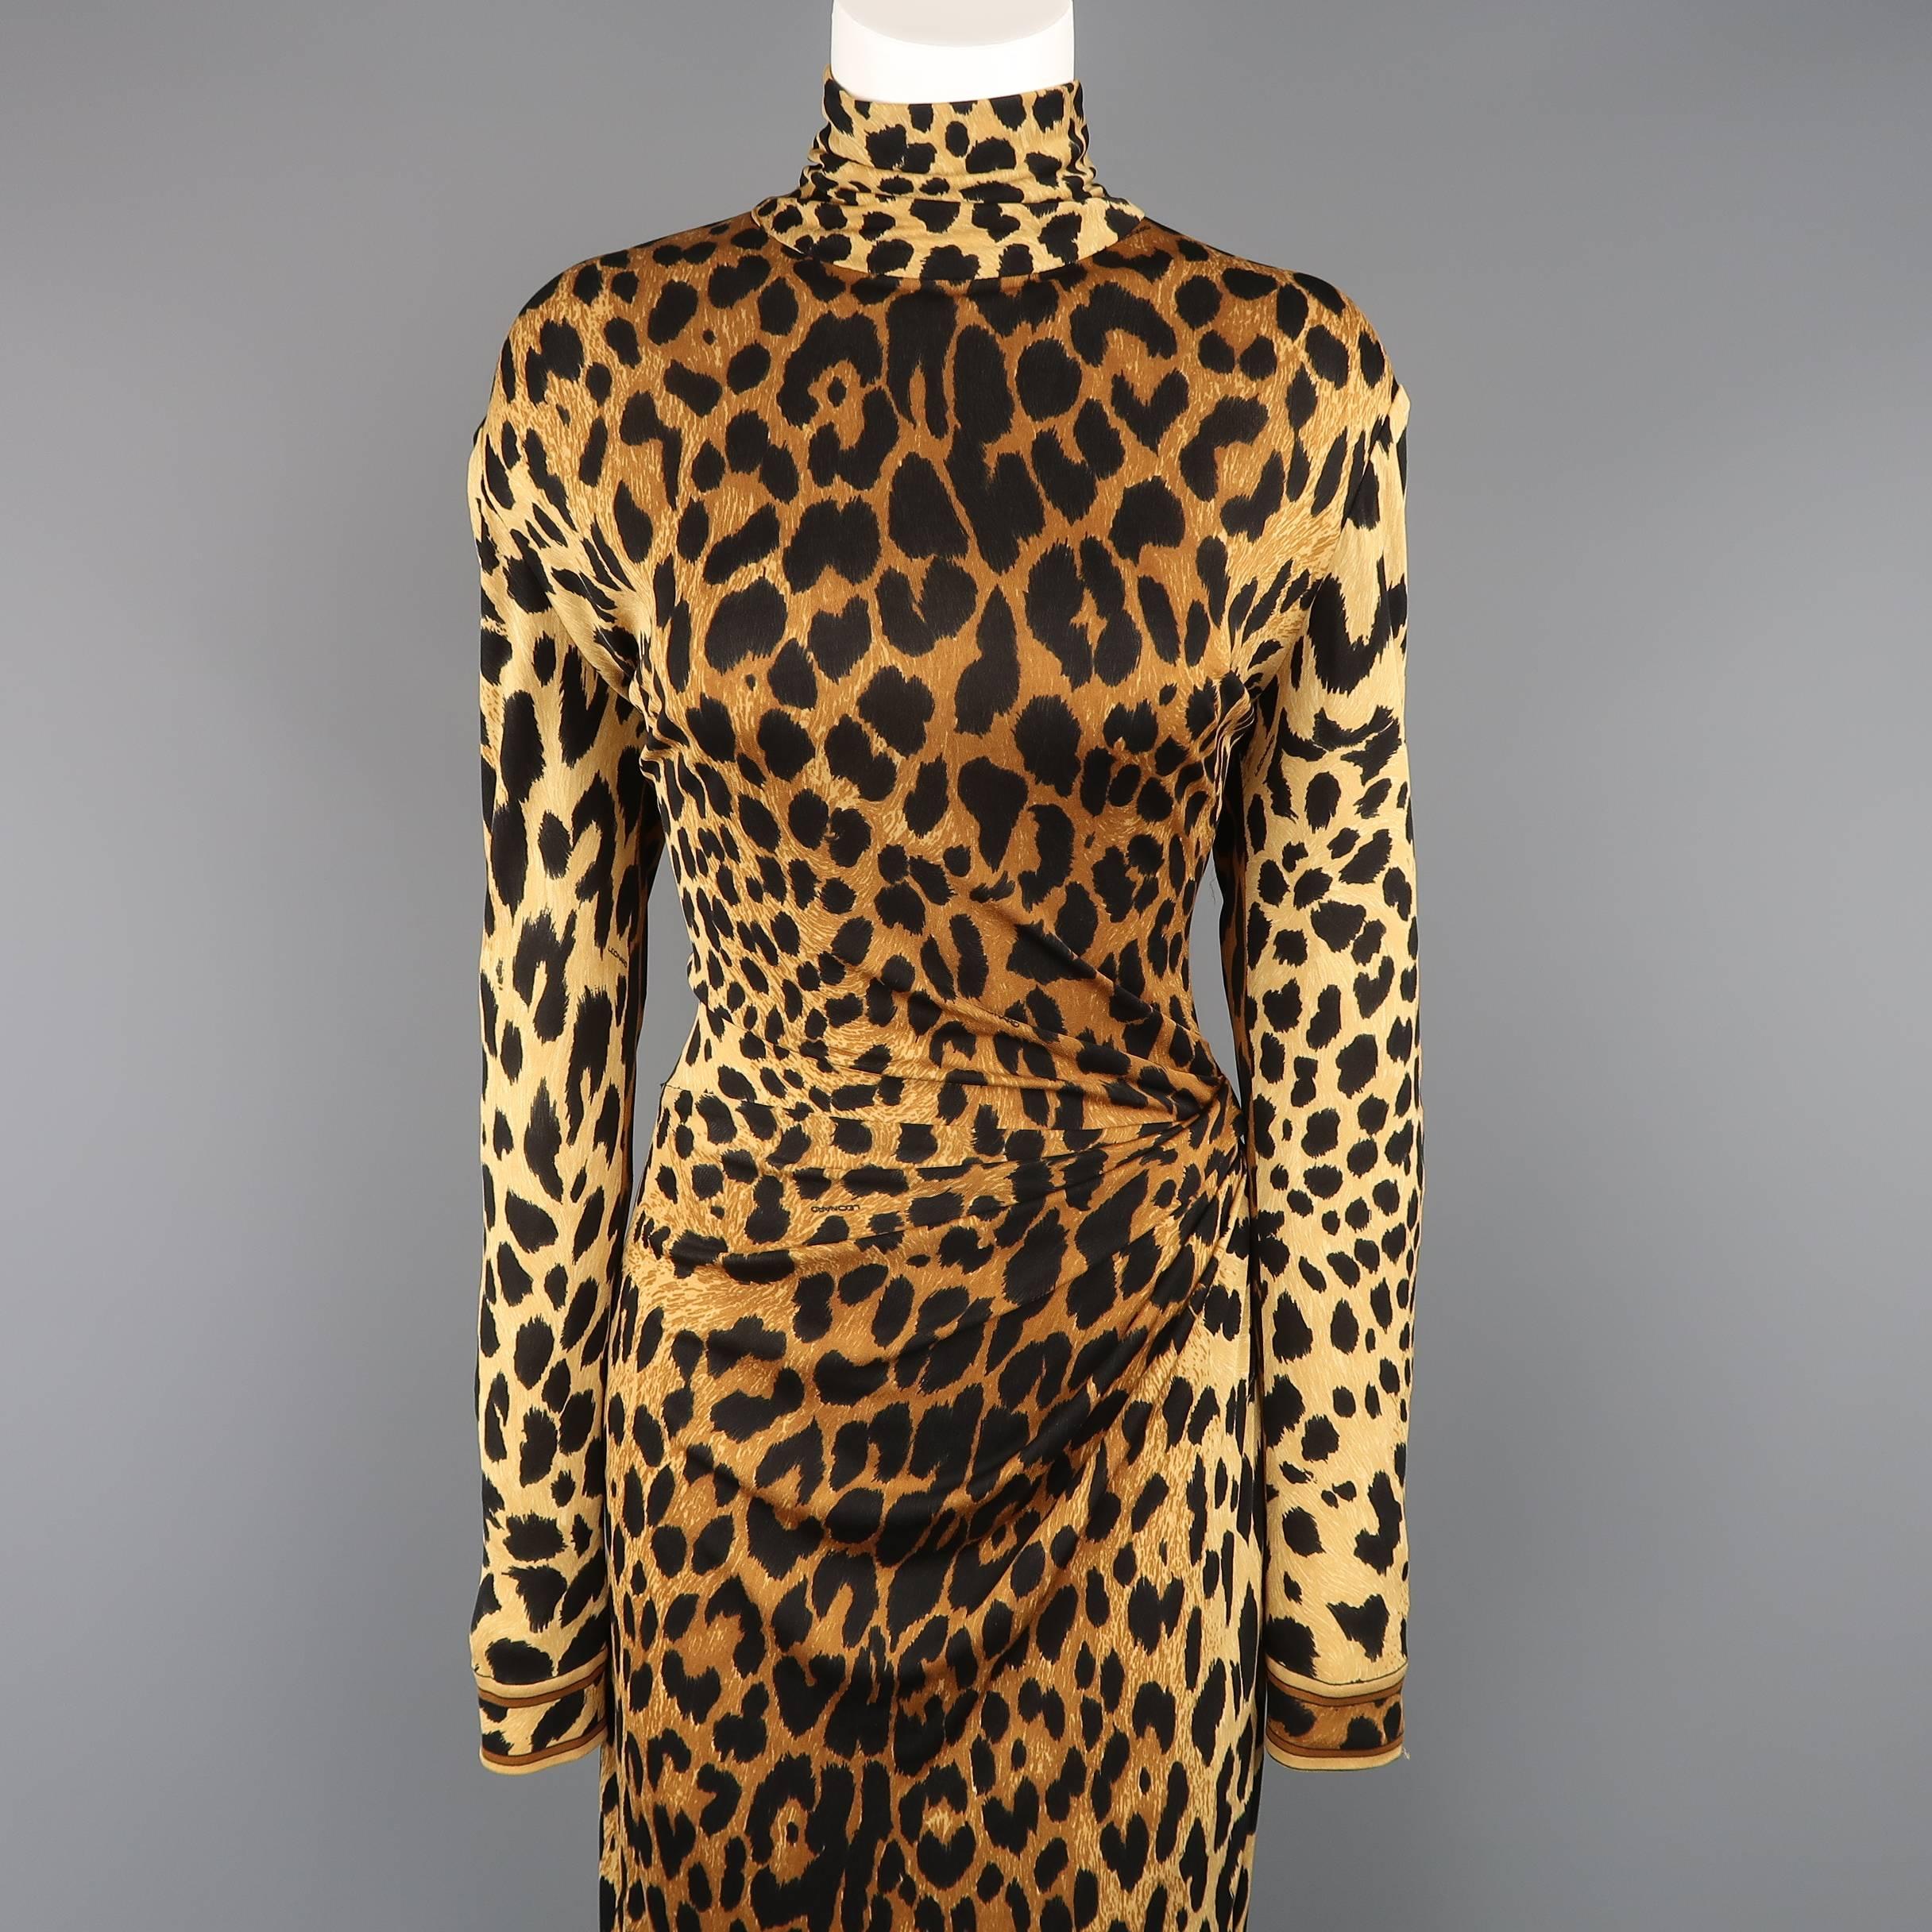 Vintage LEONARD - PARIS full length fitted cocktail dress comes in a tan cheetah print stretch jersey with a high neck, long sleeves, striped cuffs, side slit, and asymmetrical drape accented hip.
 
Good Pre-Owned Condition.
Marked: (no size tag)
